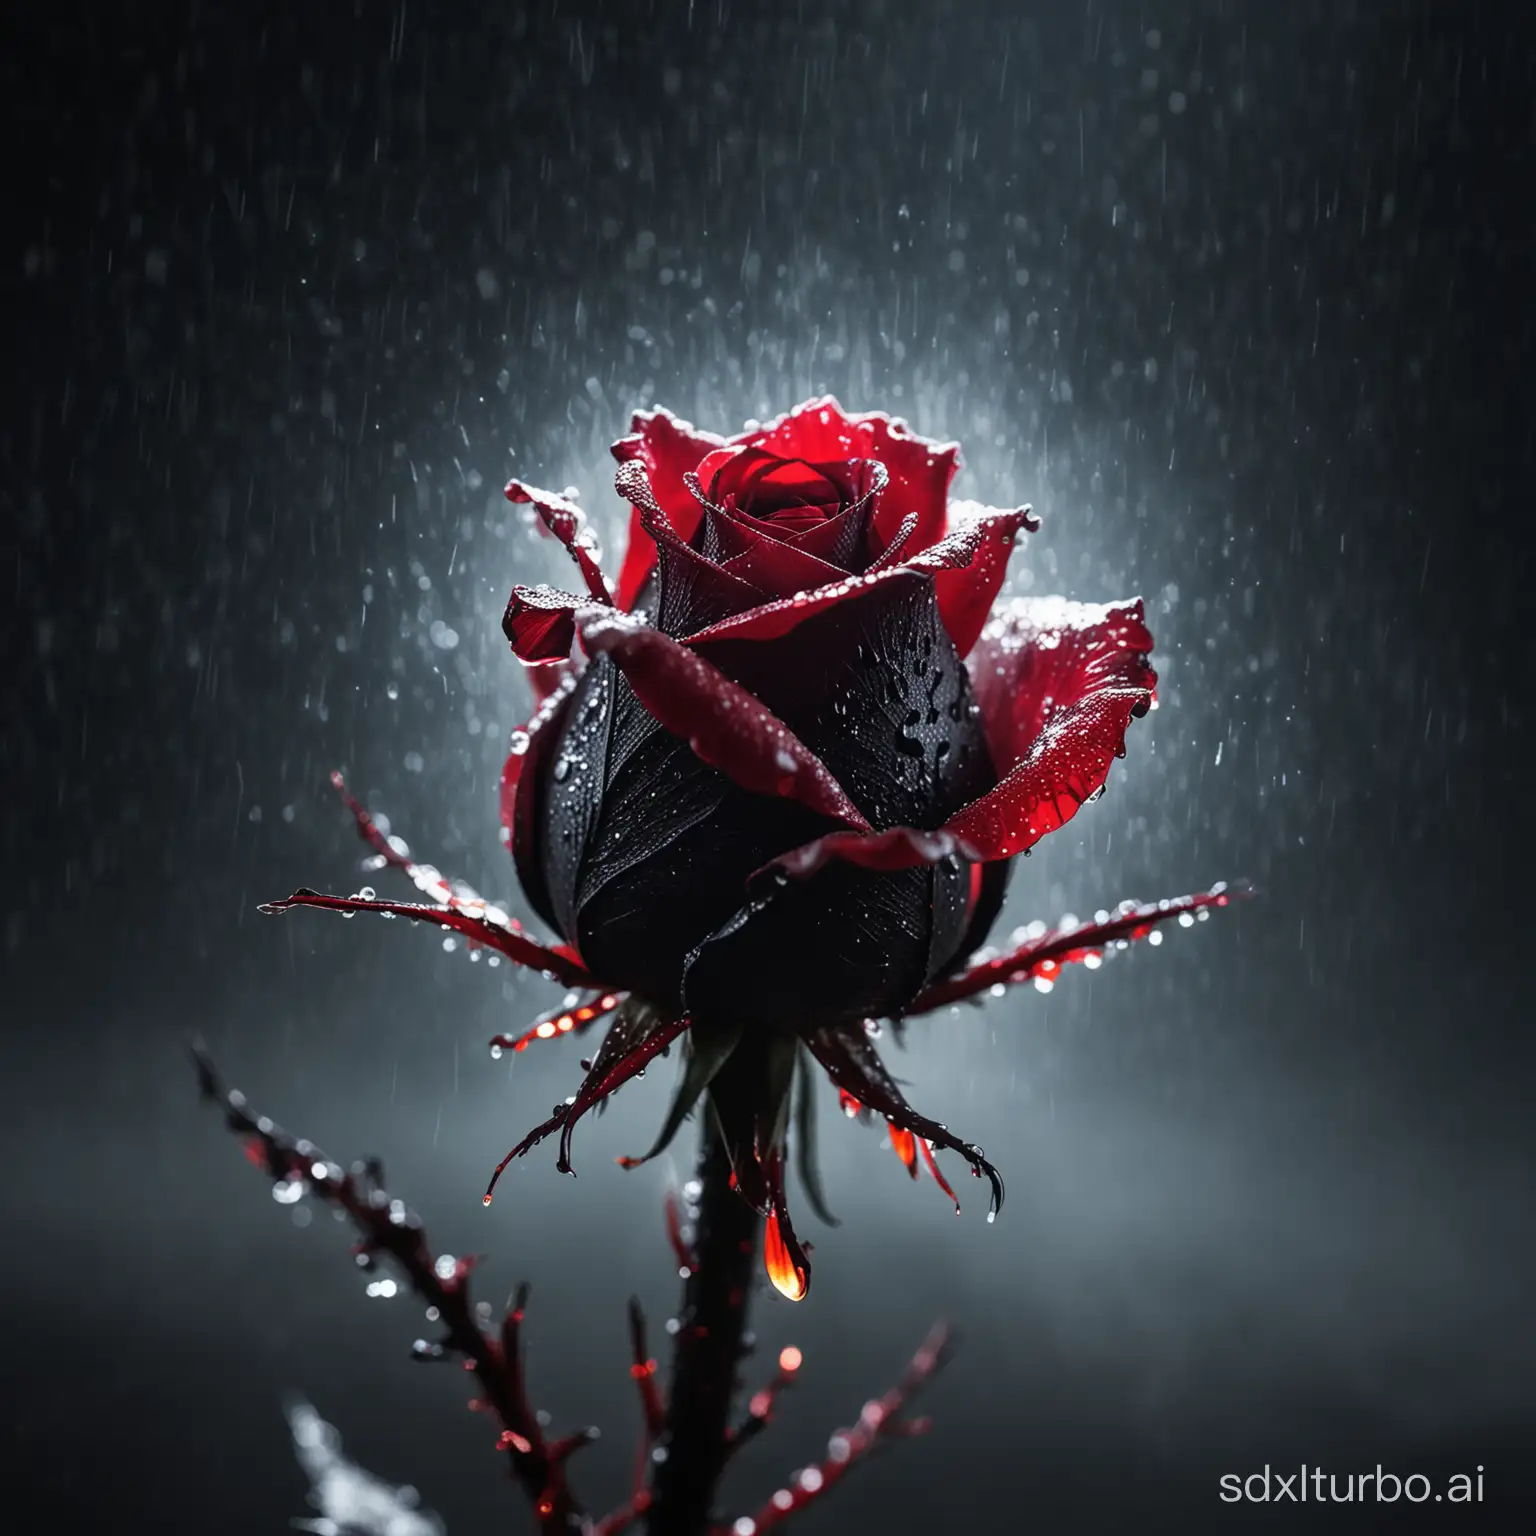 a black rose made of red neon lightning,night,foggy,dynamic angle,cinematic still,100mm f/2.8 macro lens,close-up,award winning photo,zavy-lghttrl,Artnthrmg,Water droplets on petals,reflections on water droplets,grain of petals,focus black rose,solo,